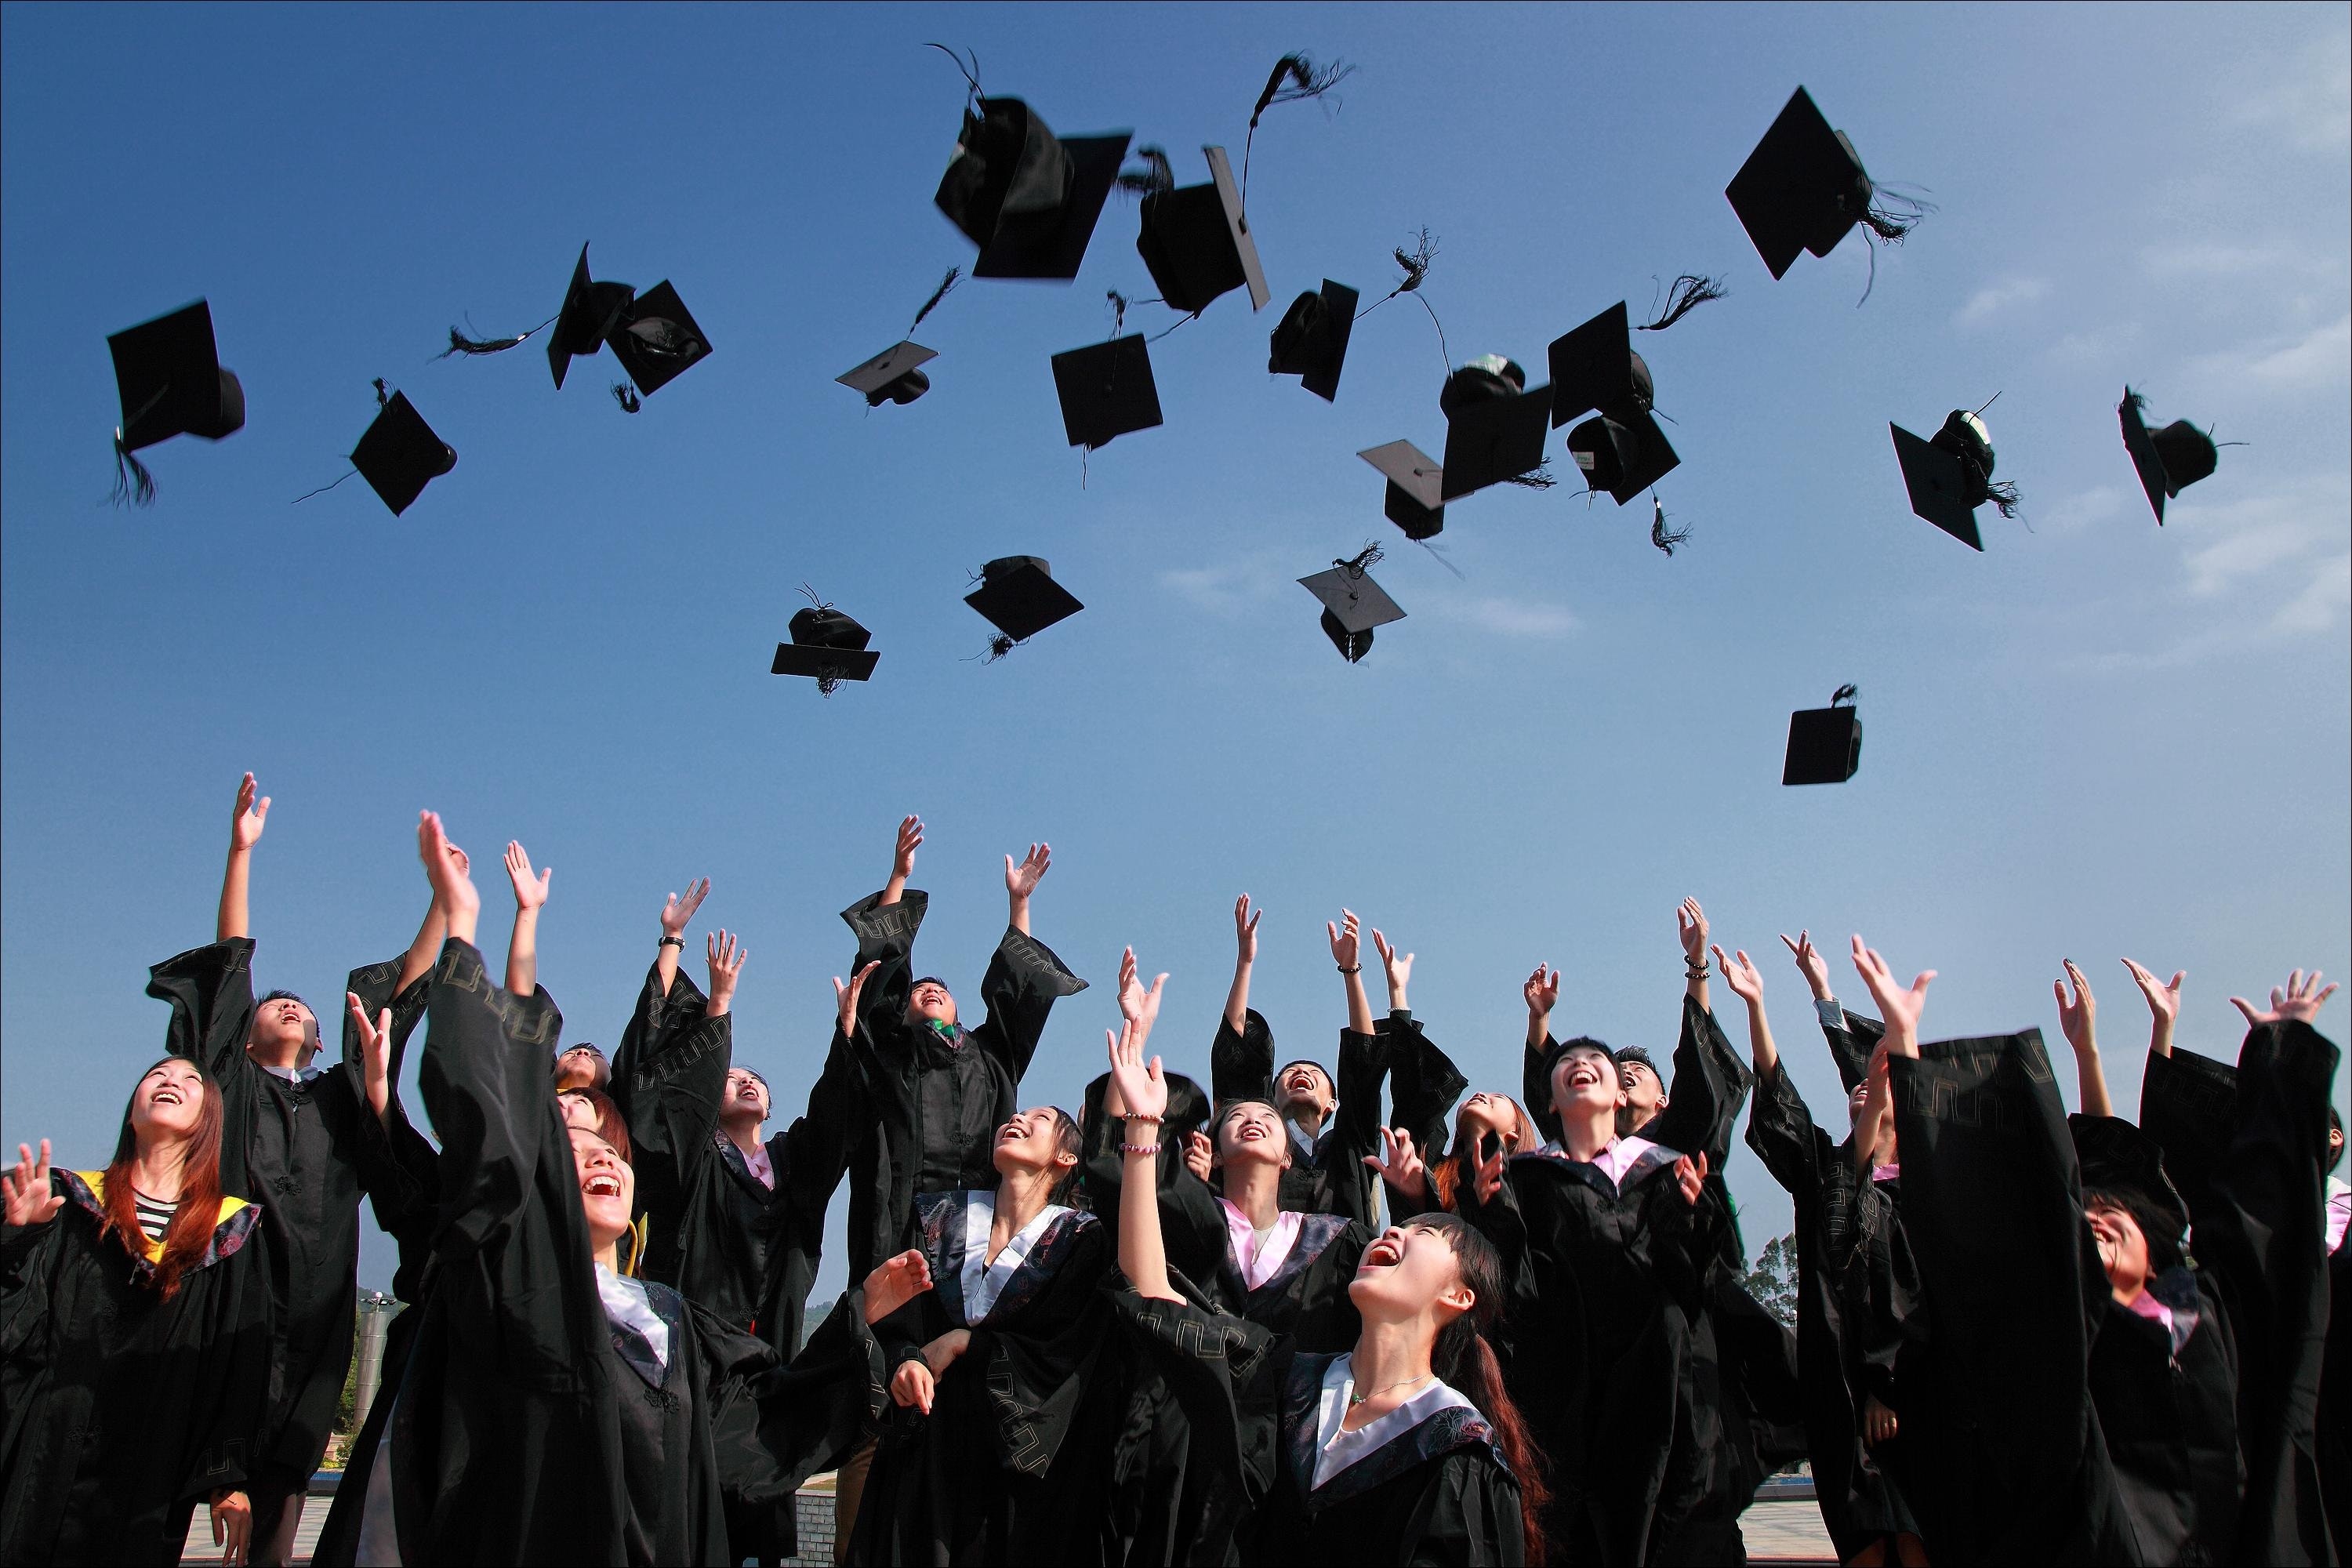 Graduation leaves more than hats in the air. Navigating the future is more complex for recent college graduates.